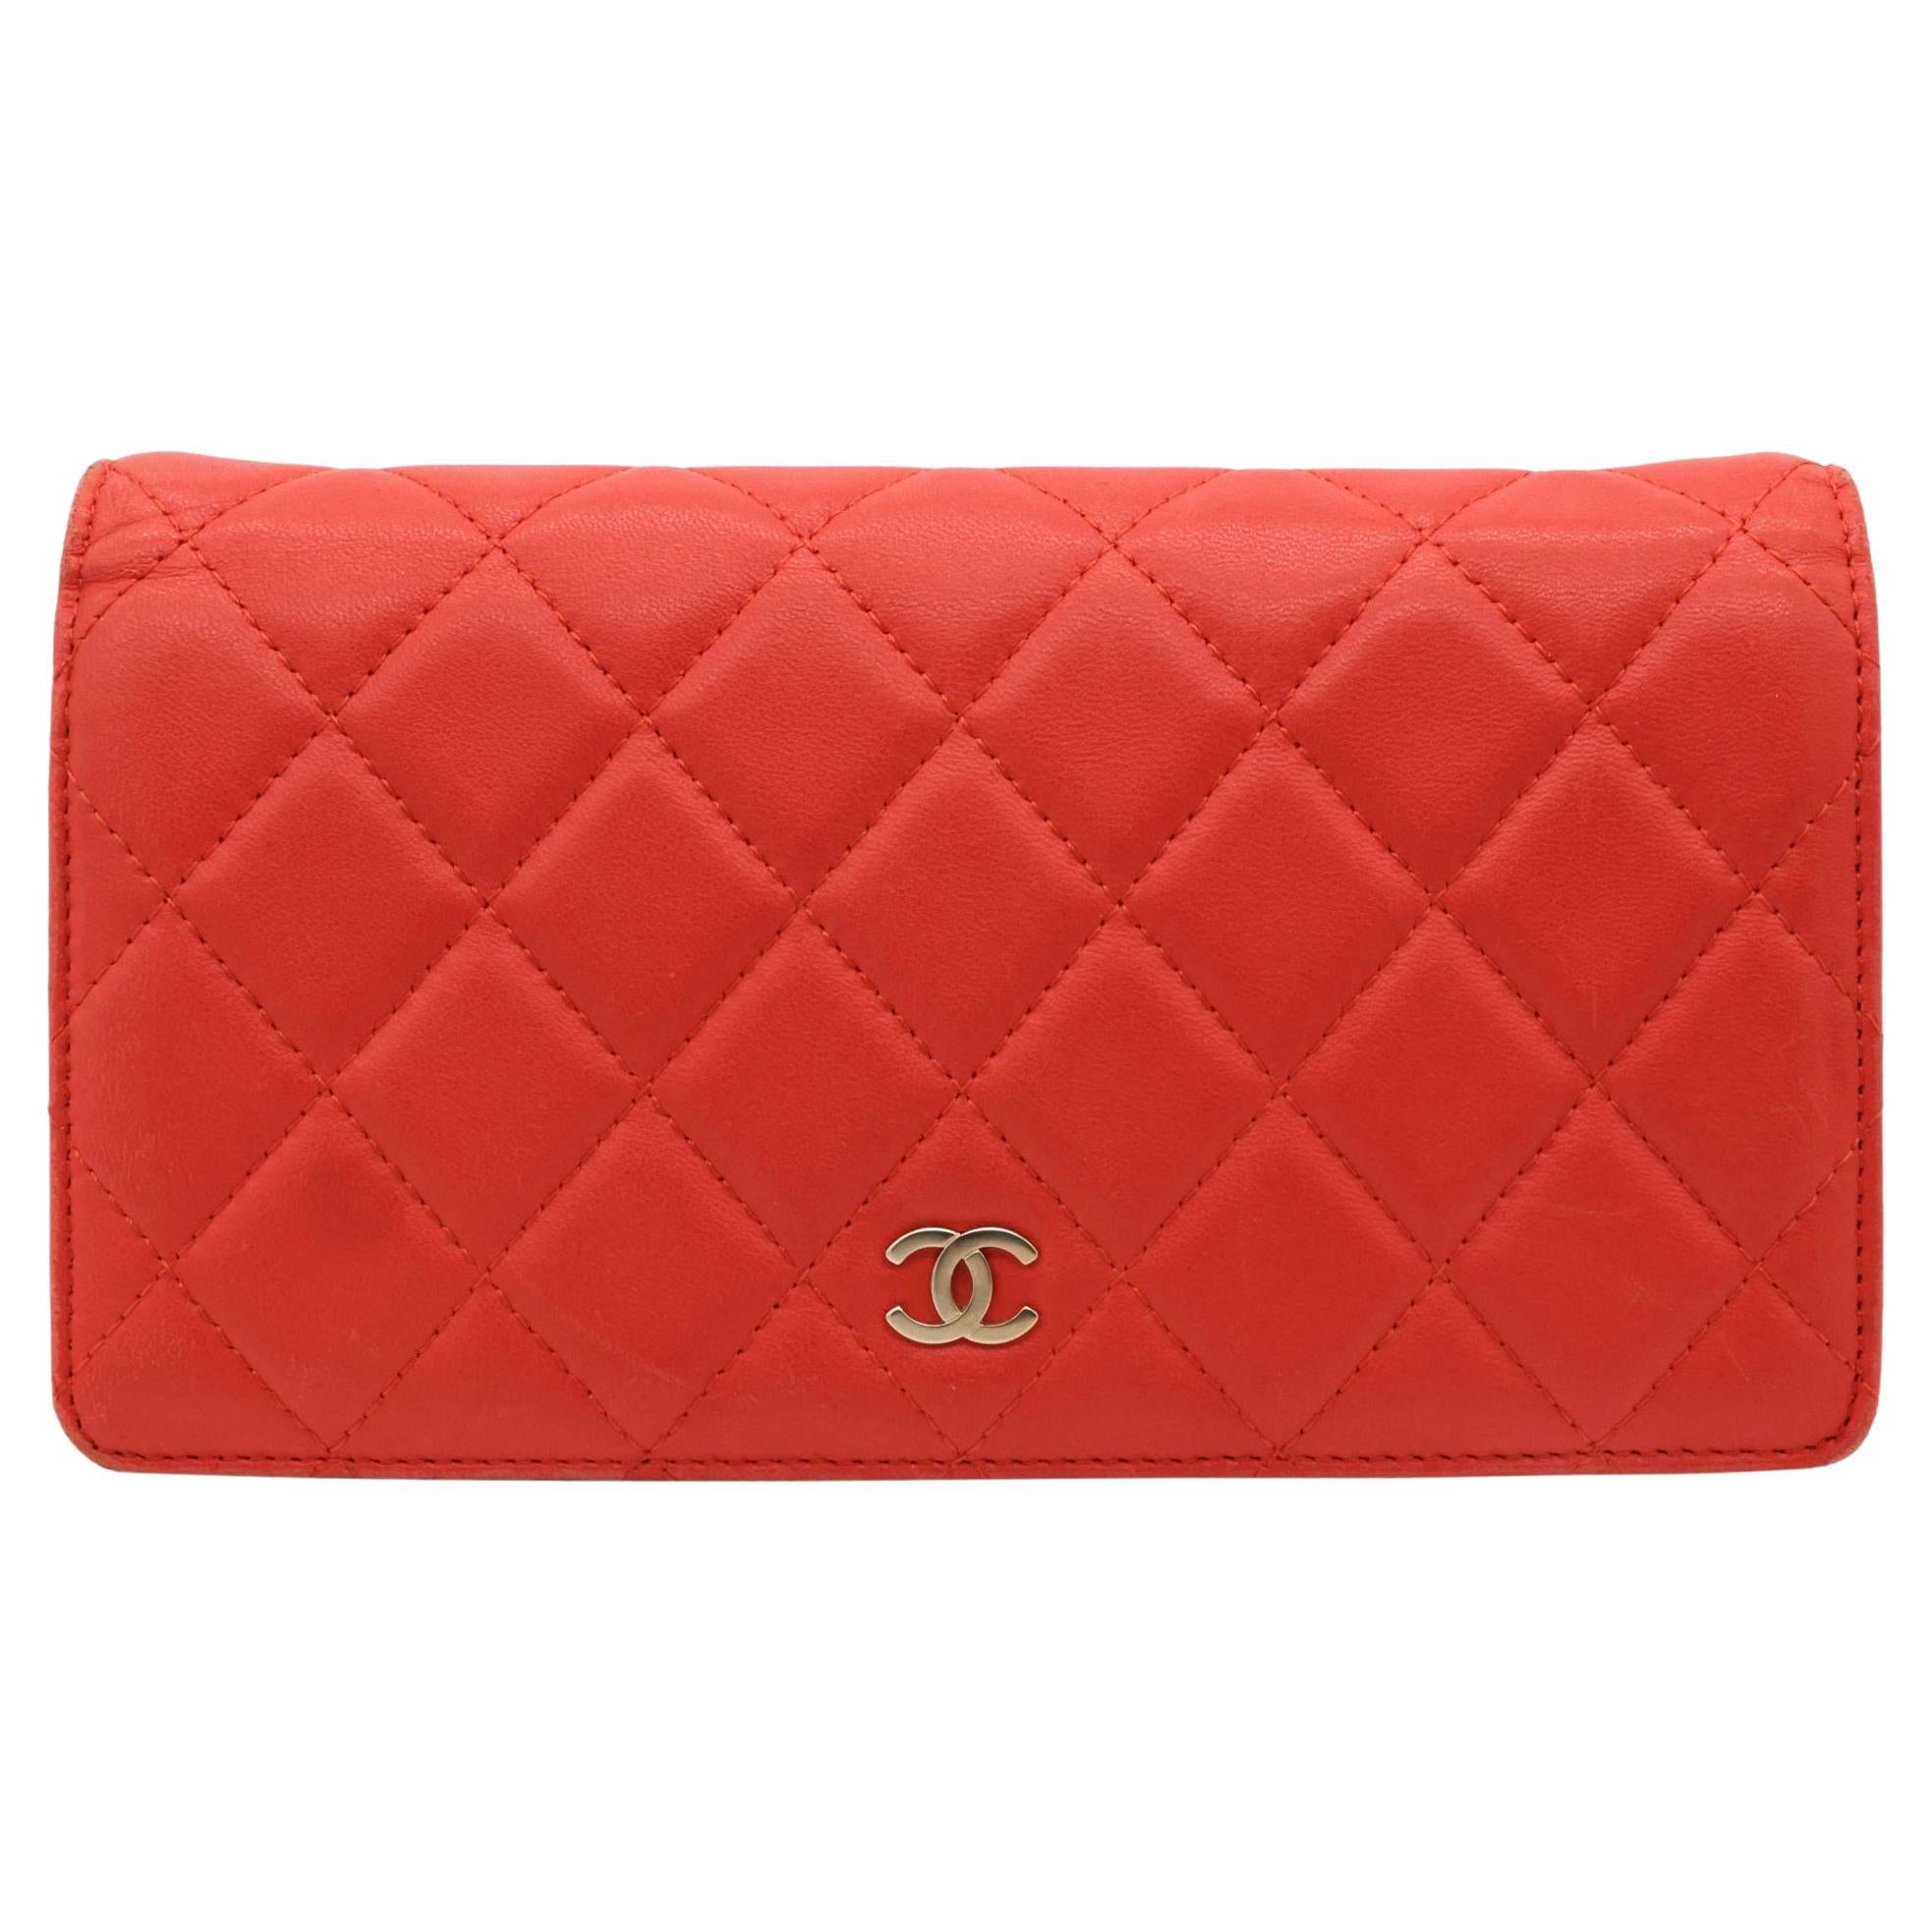 Chanel Quilted Coral Lambskin Leather Yen Continental Wallet, 2009 - 2010.